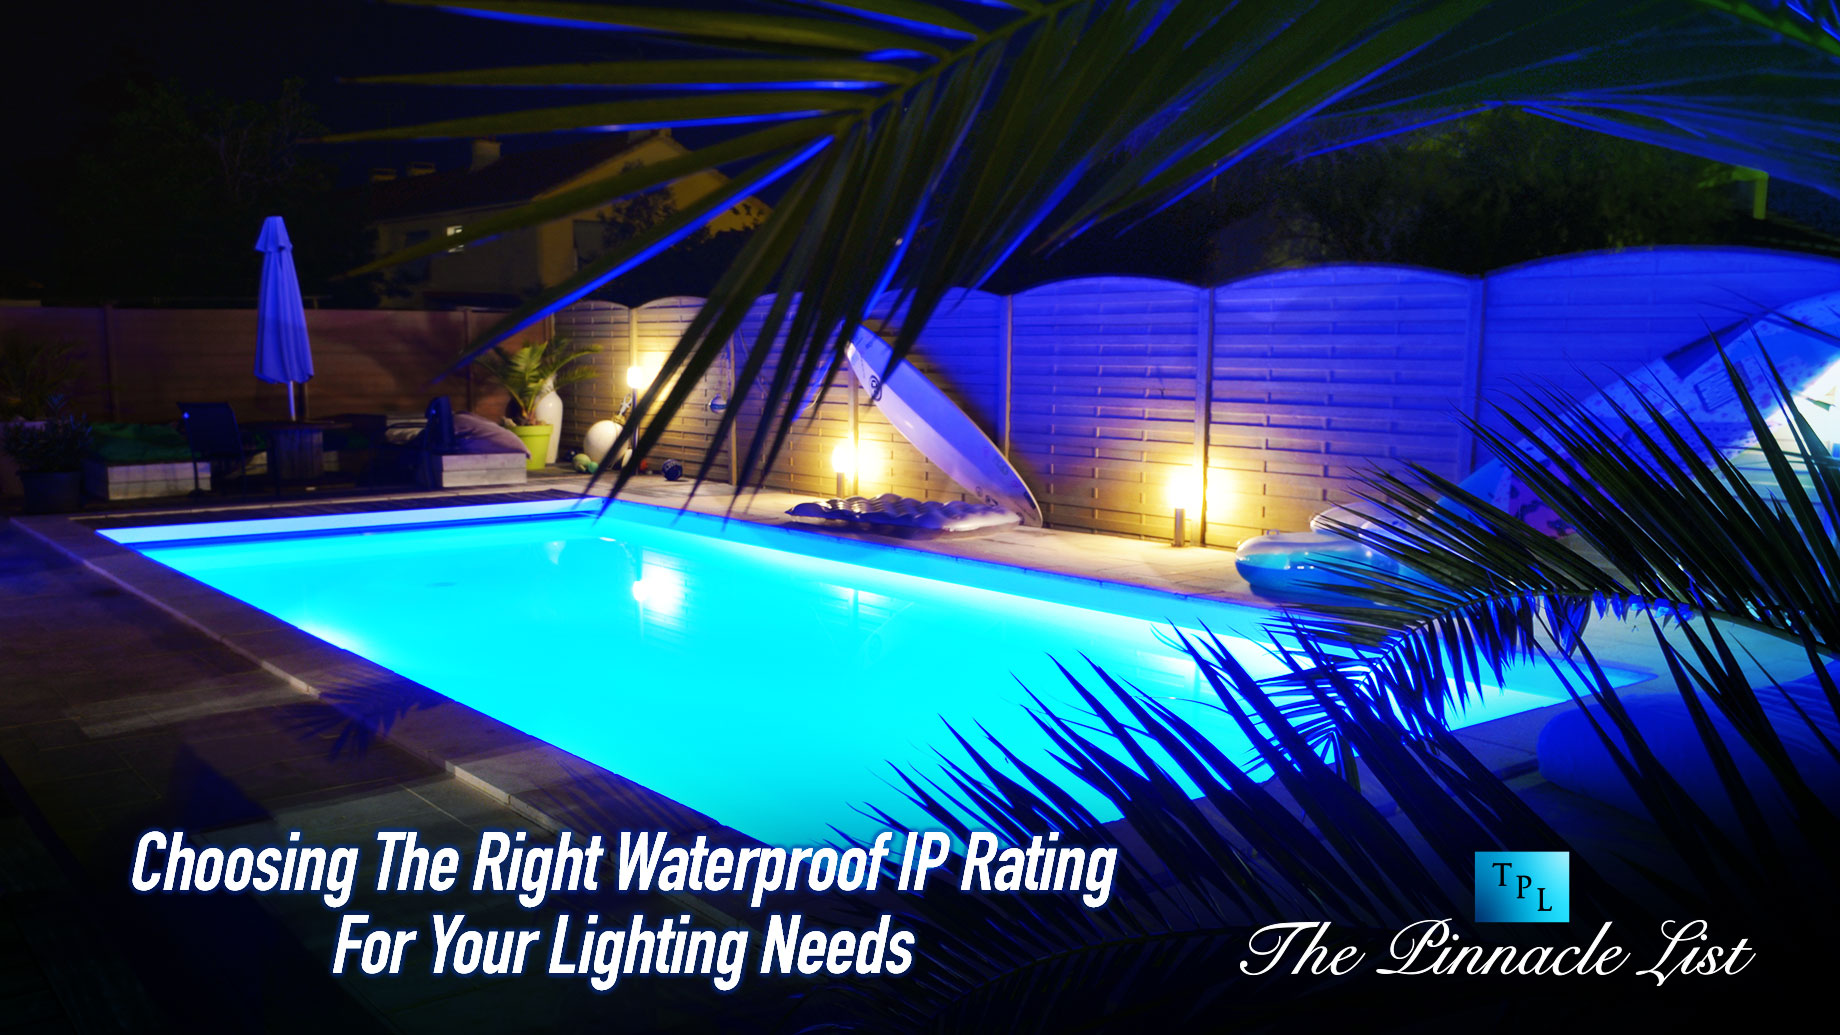 Choosing The Right Waterproof IP Rating For Your Lighting Needs